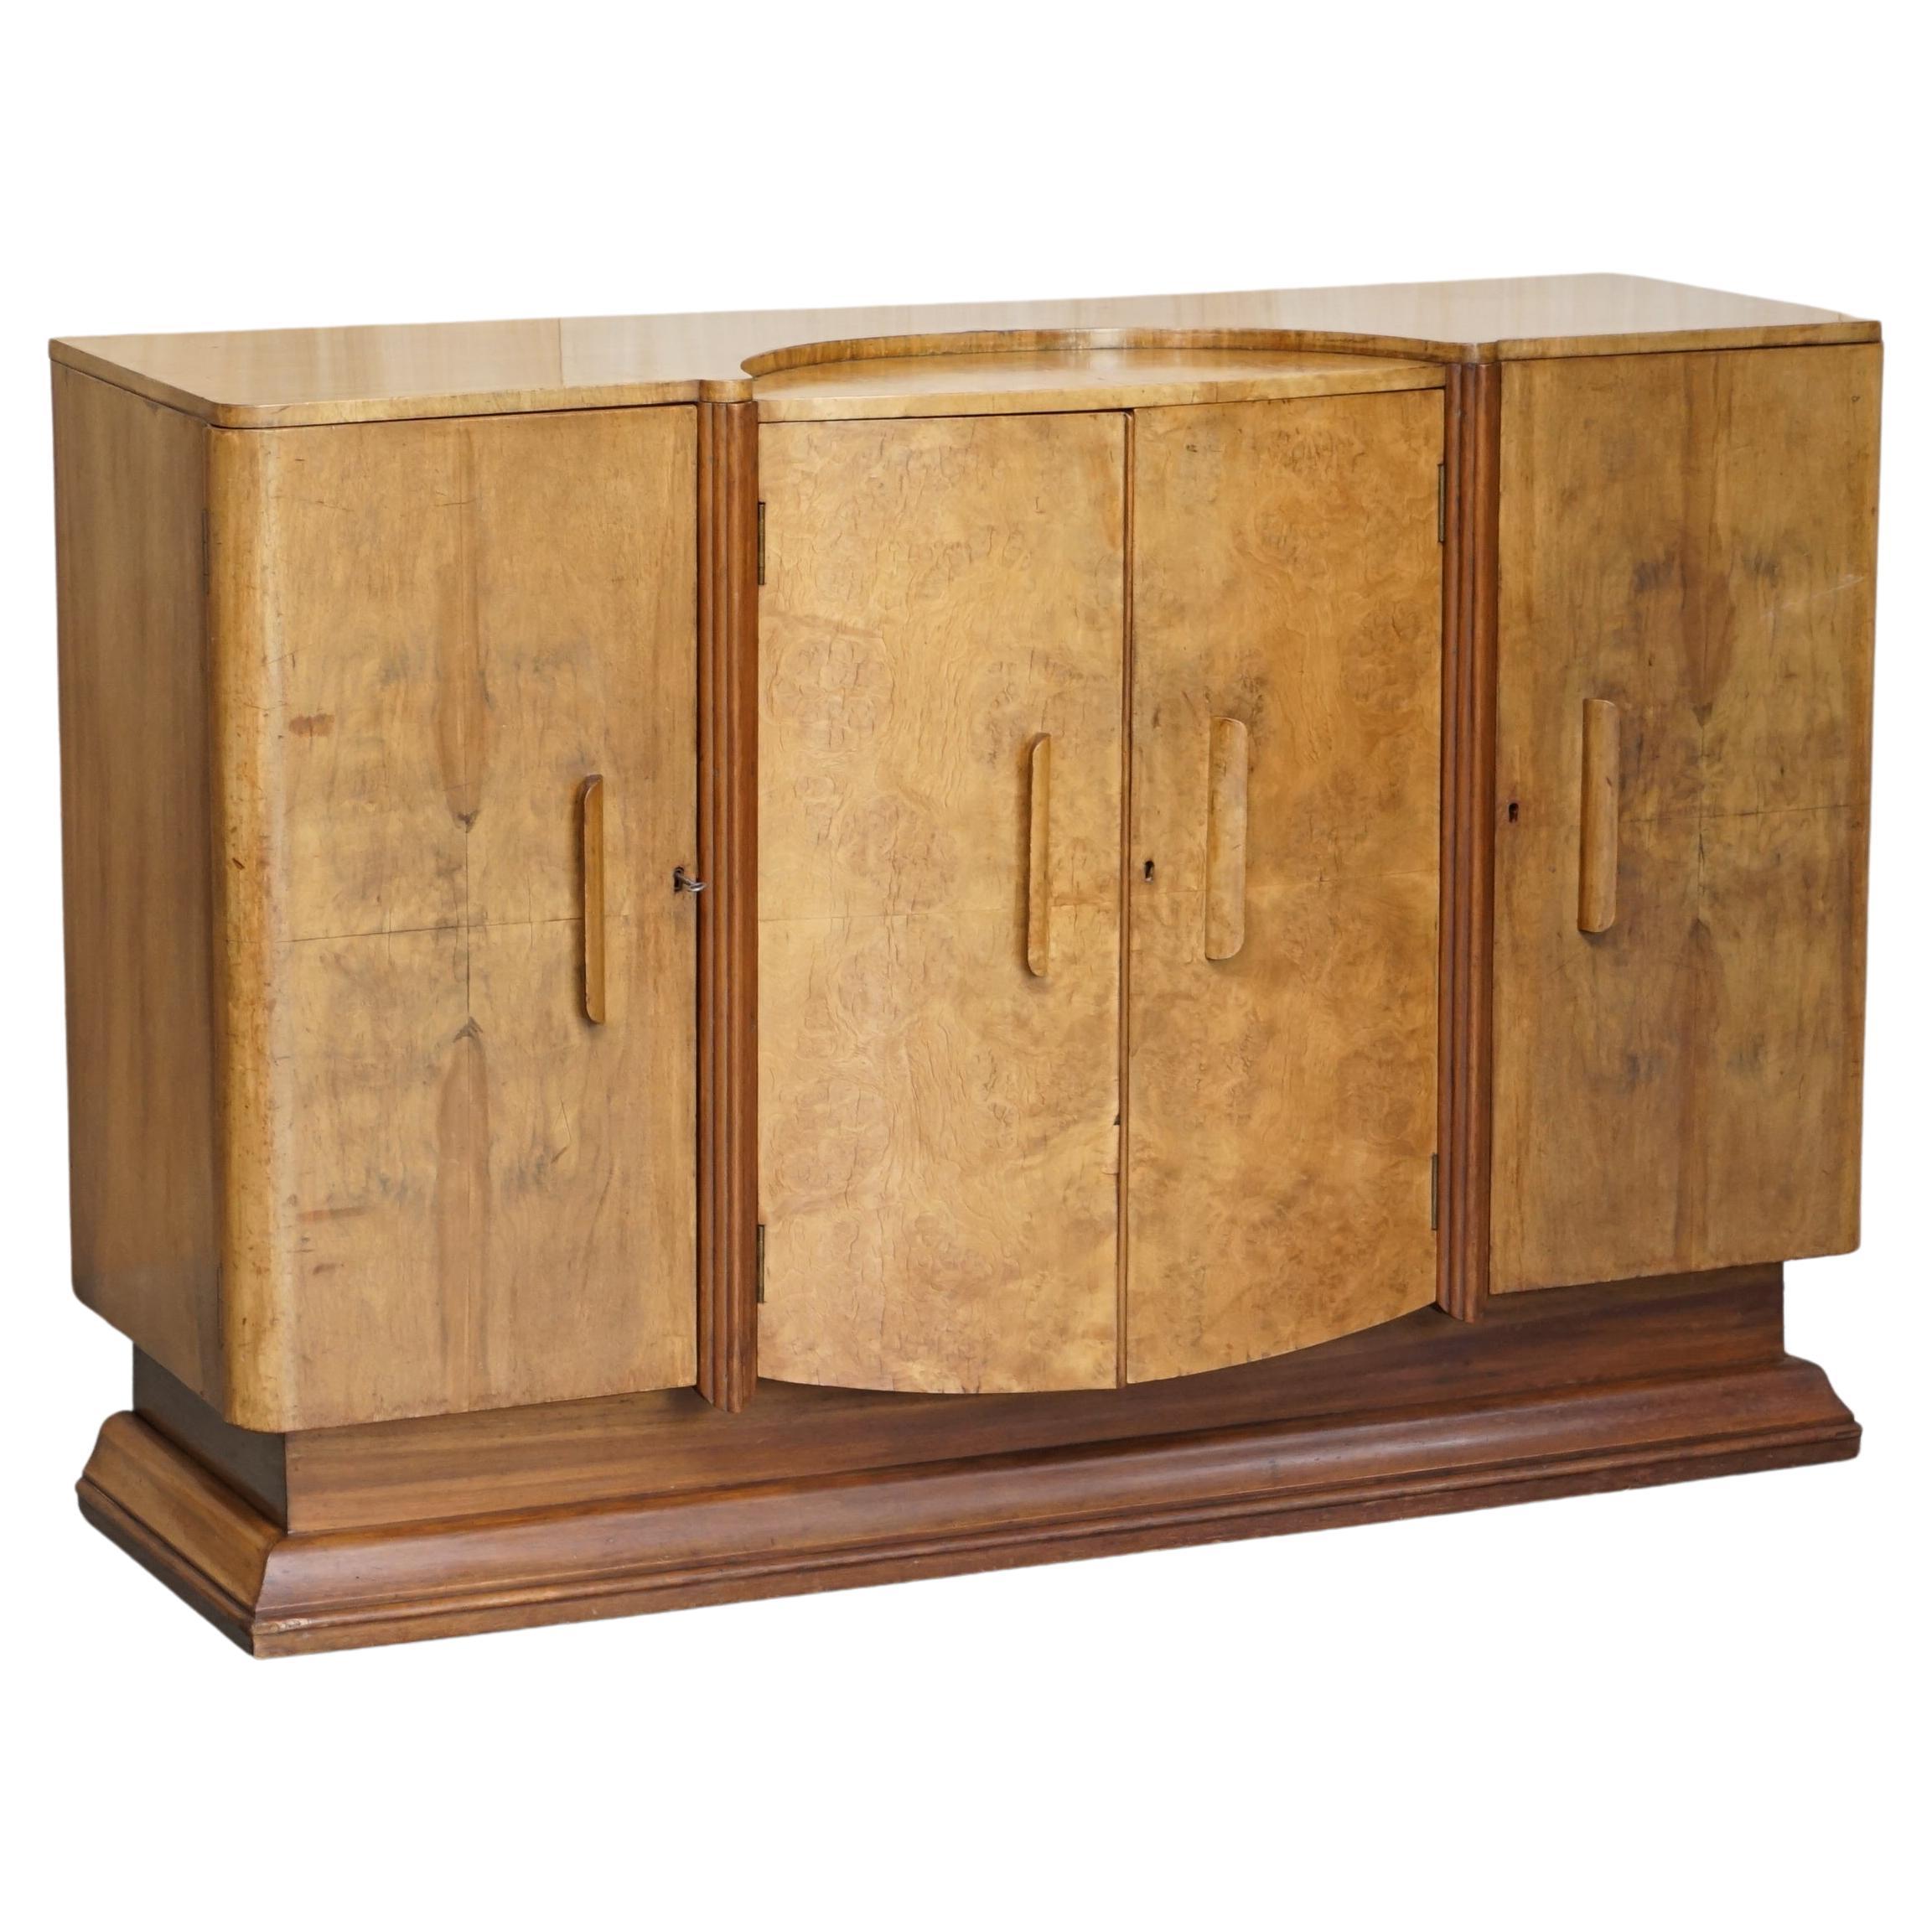 Stunning Antique Art Deco Burr Walnut Sideboard with Drawers Drinks Cabinet For Sale